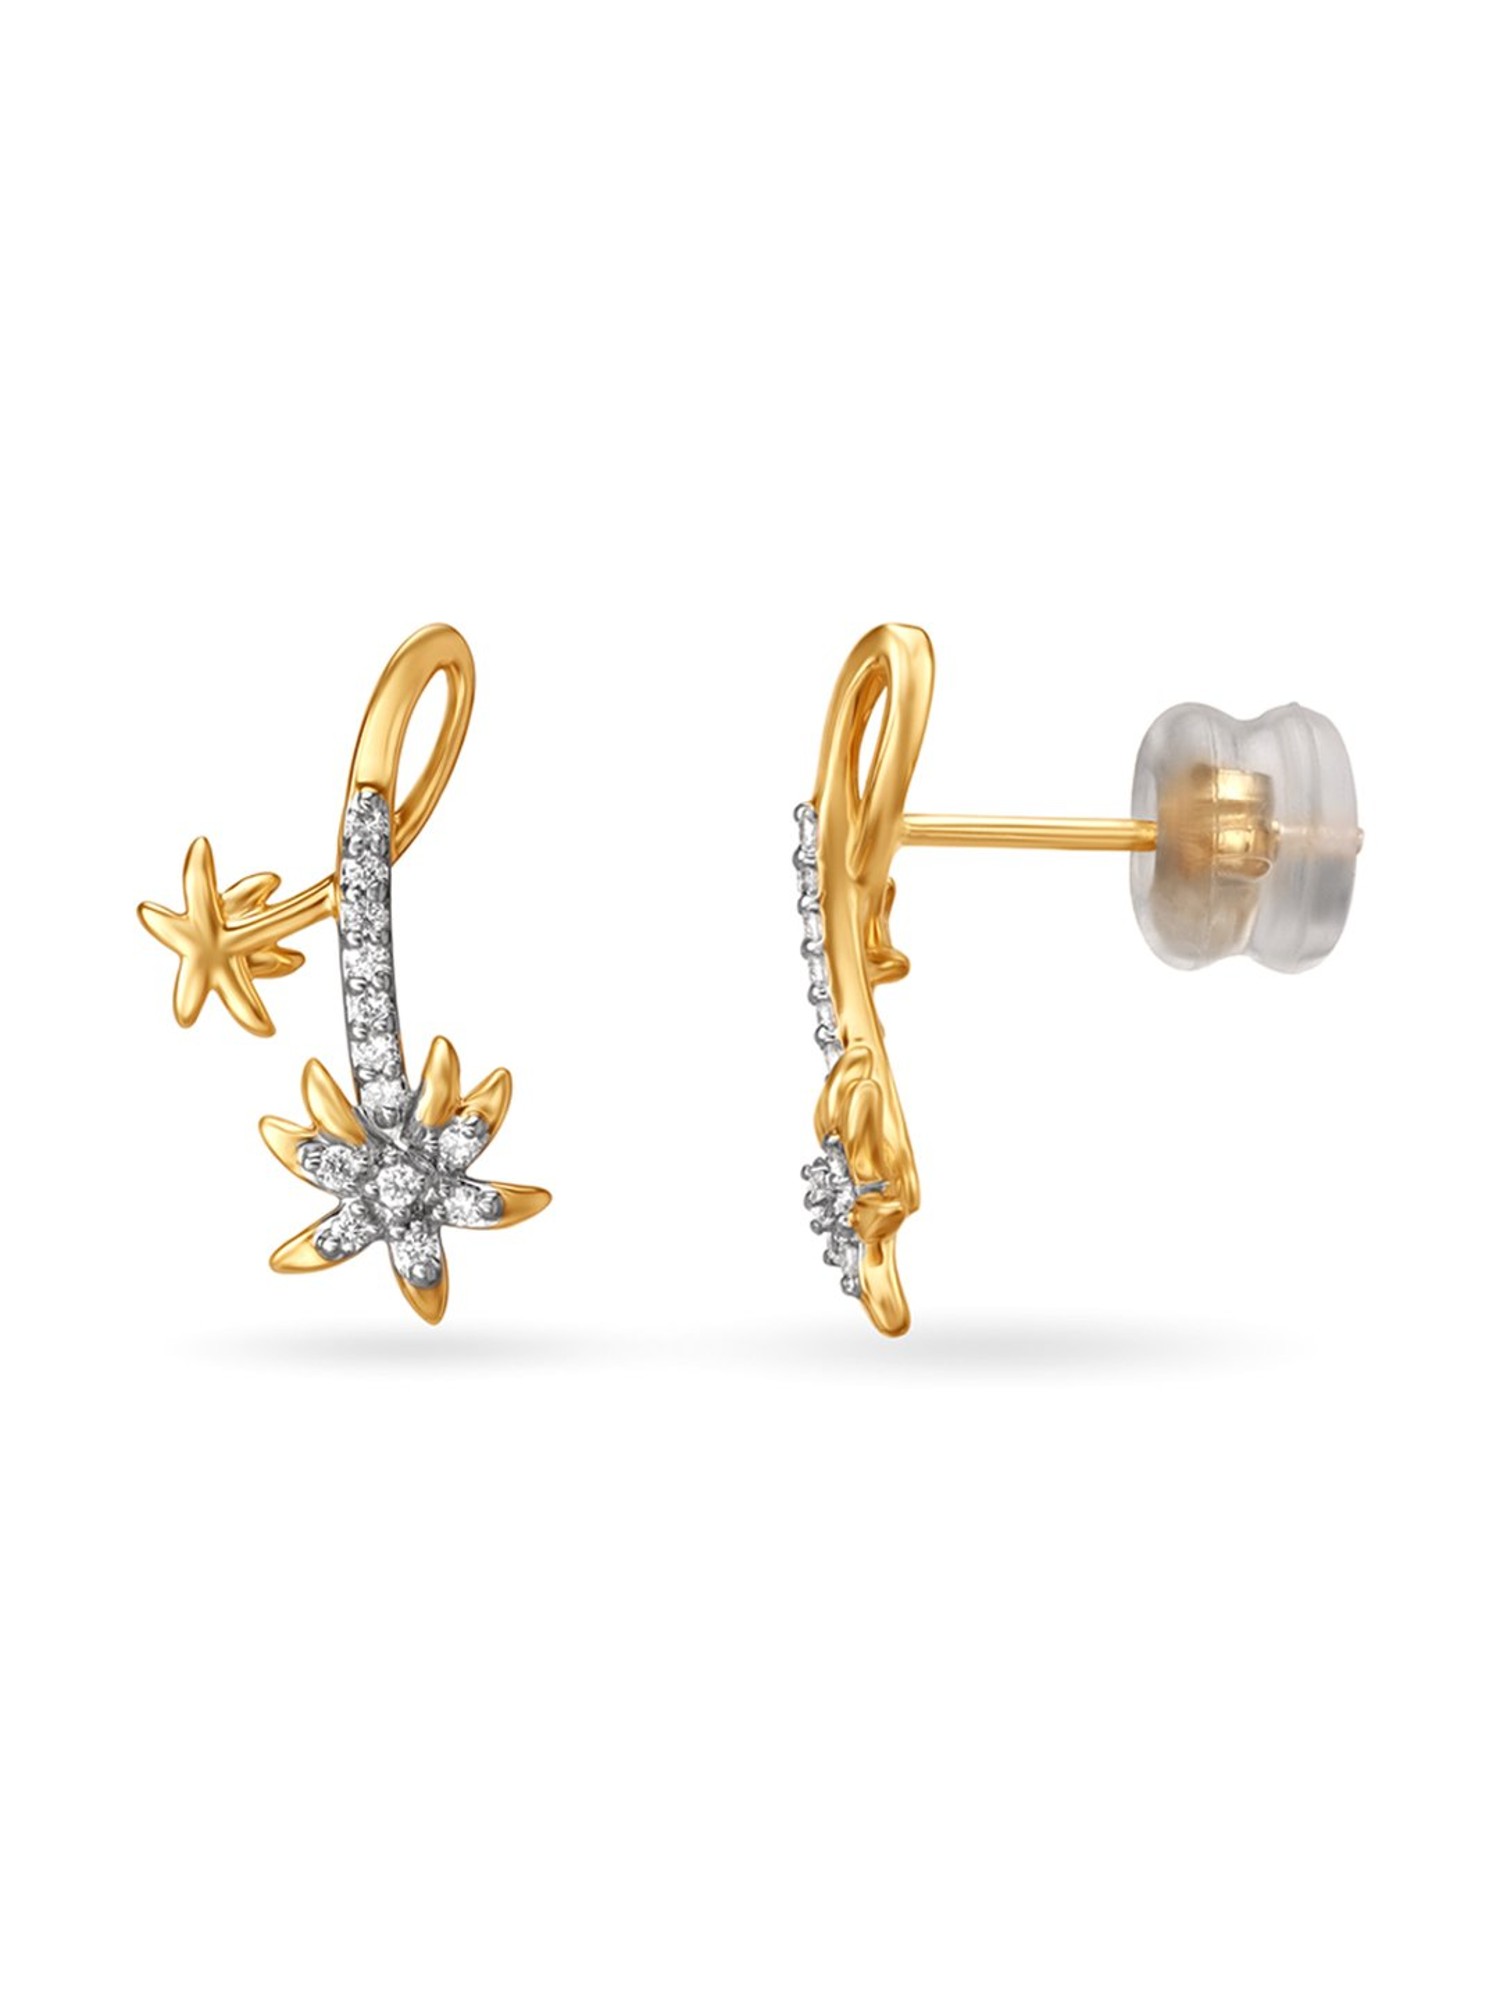 Spiral Stud Earrings in Abstract Design | Tanishq